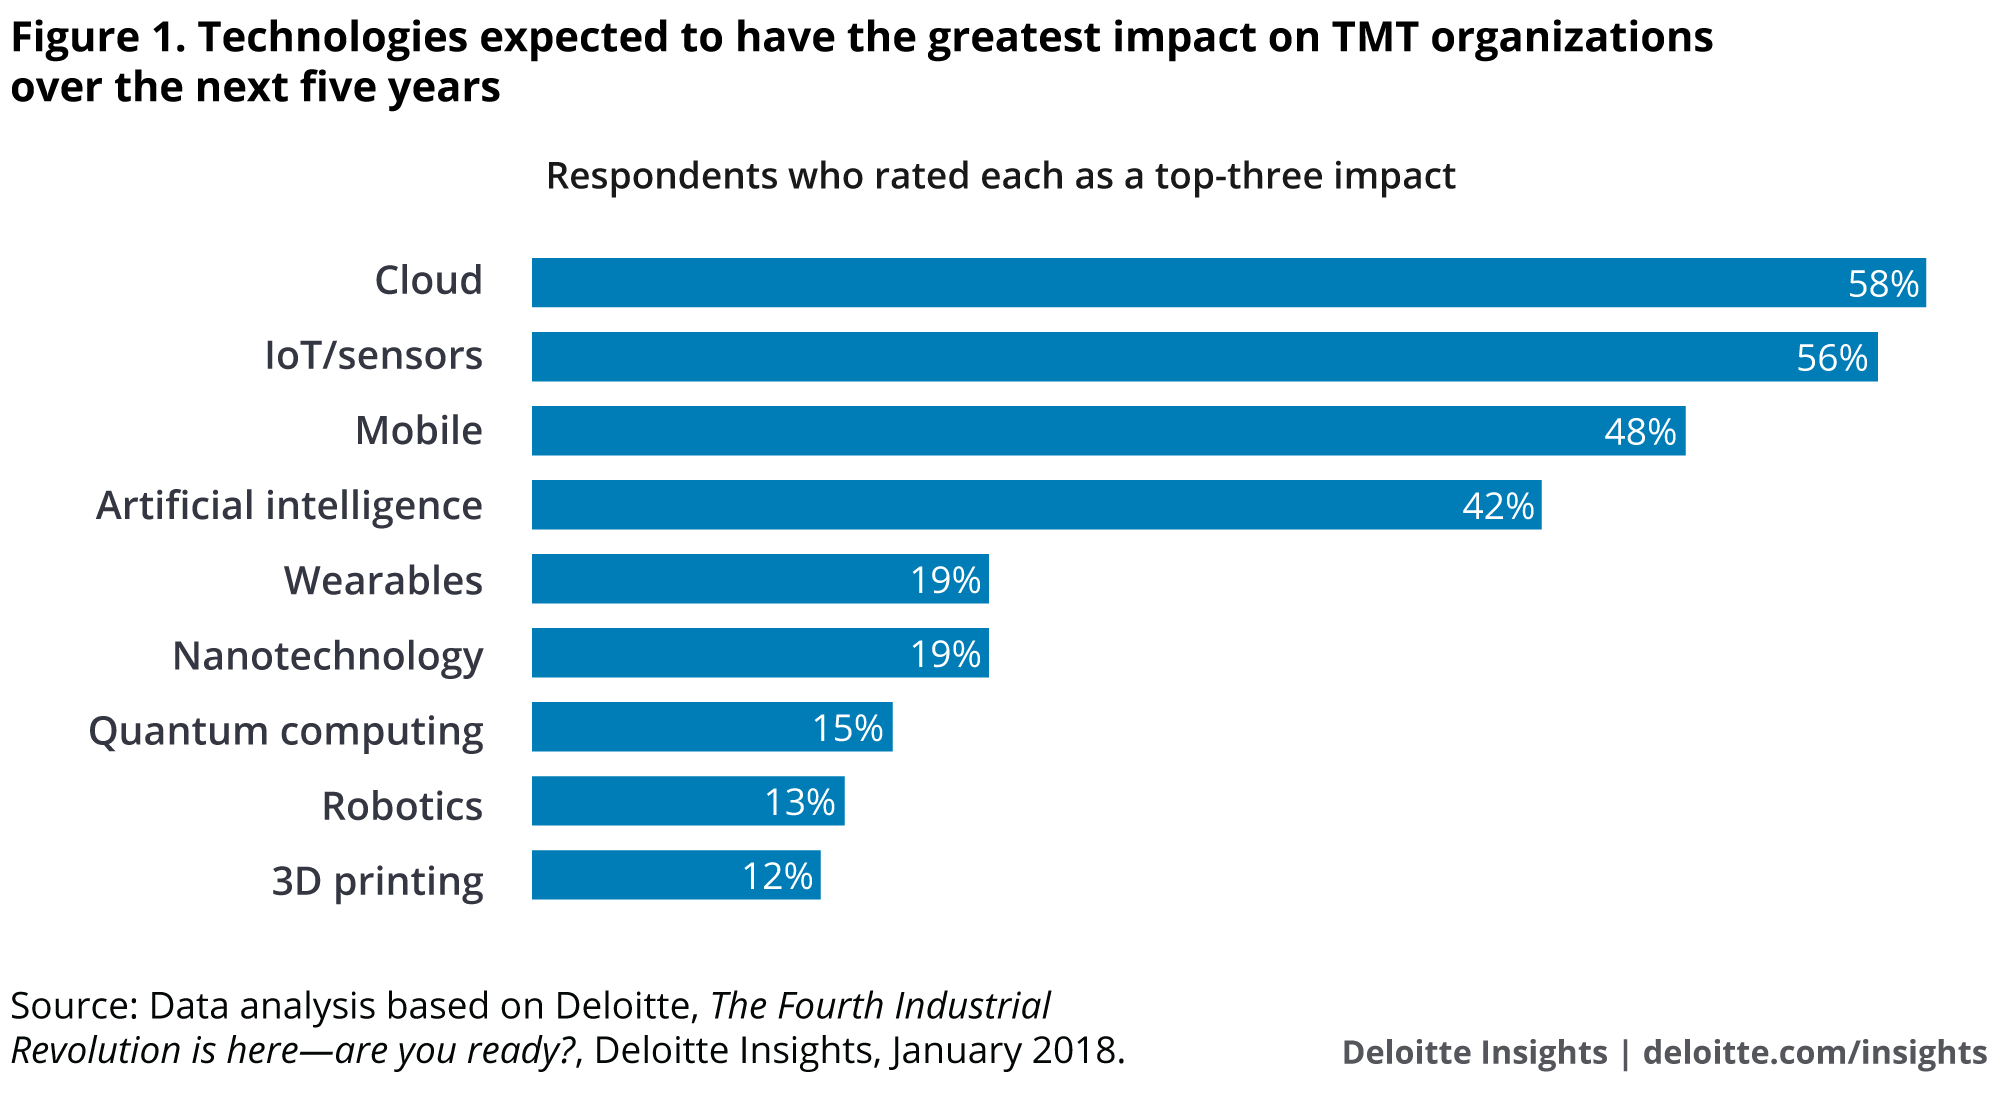 Technologies expected to have the greatest impact on TMT organizations over the next five years